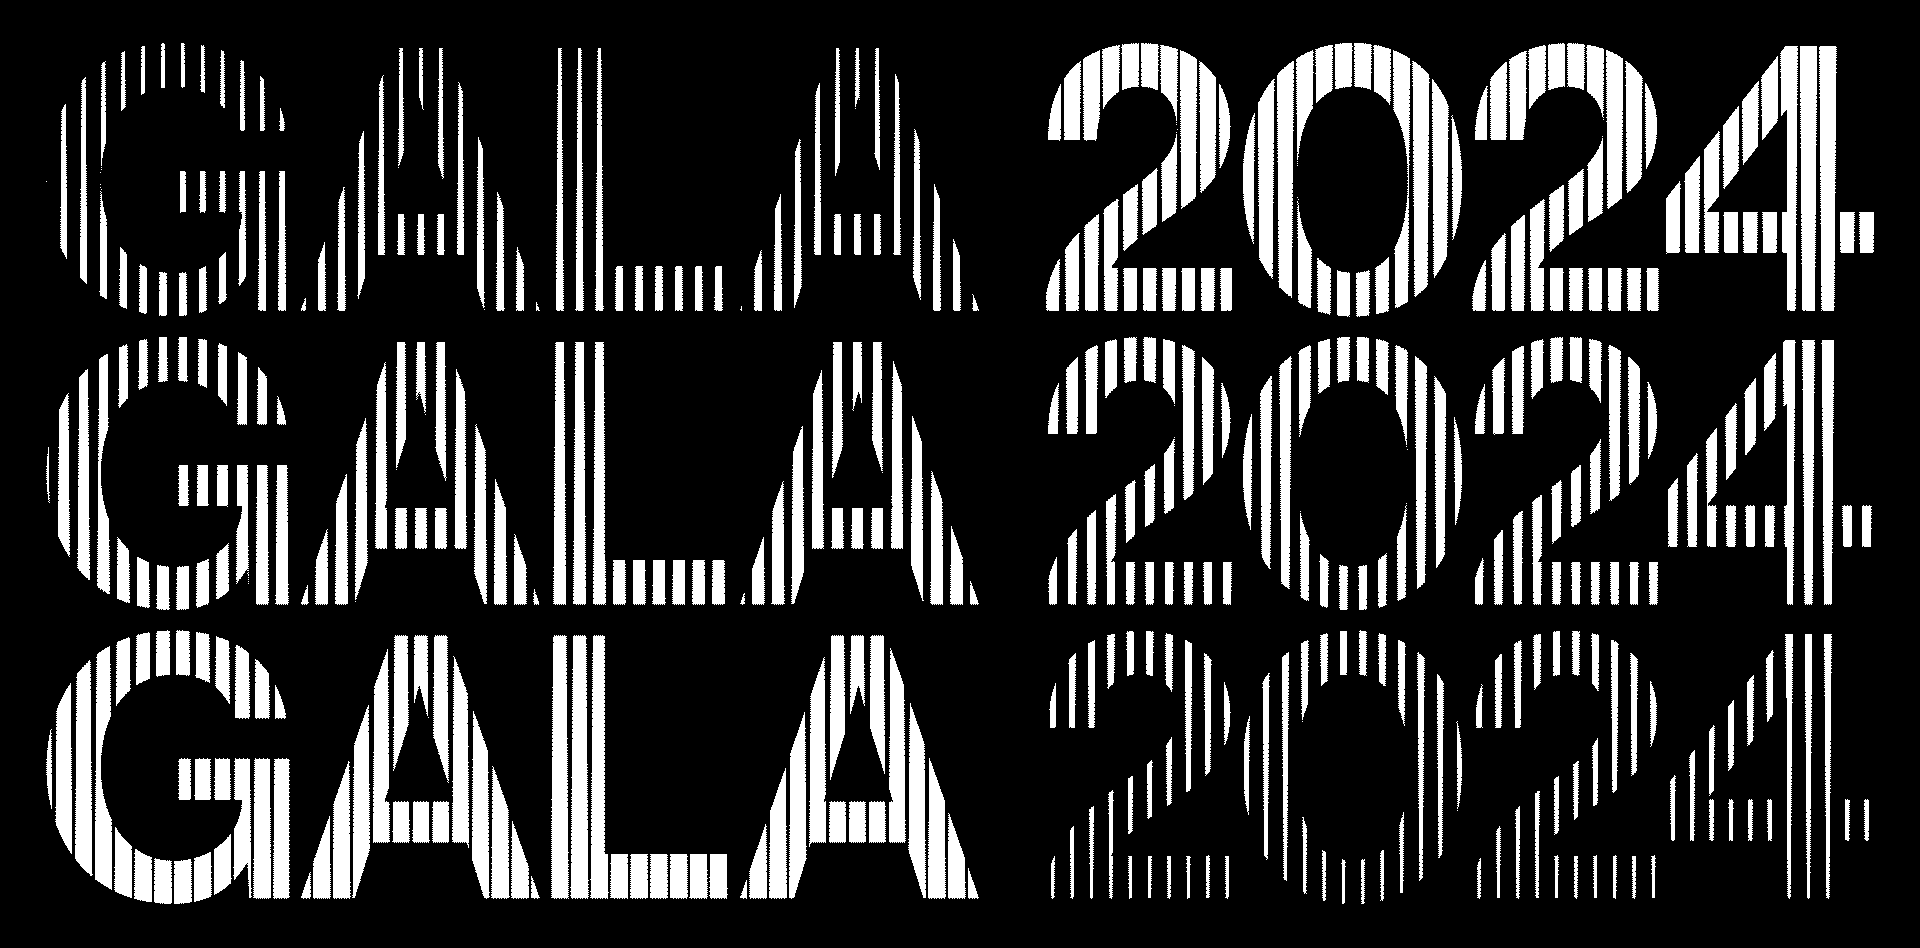 Stylized text "GALA 2024" repeated four times with a vertical stripe pattern on a black background.